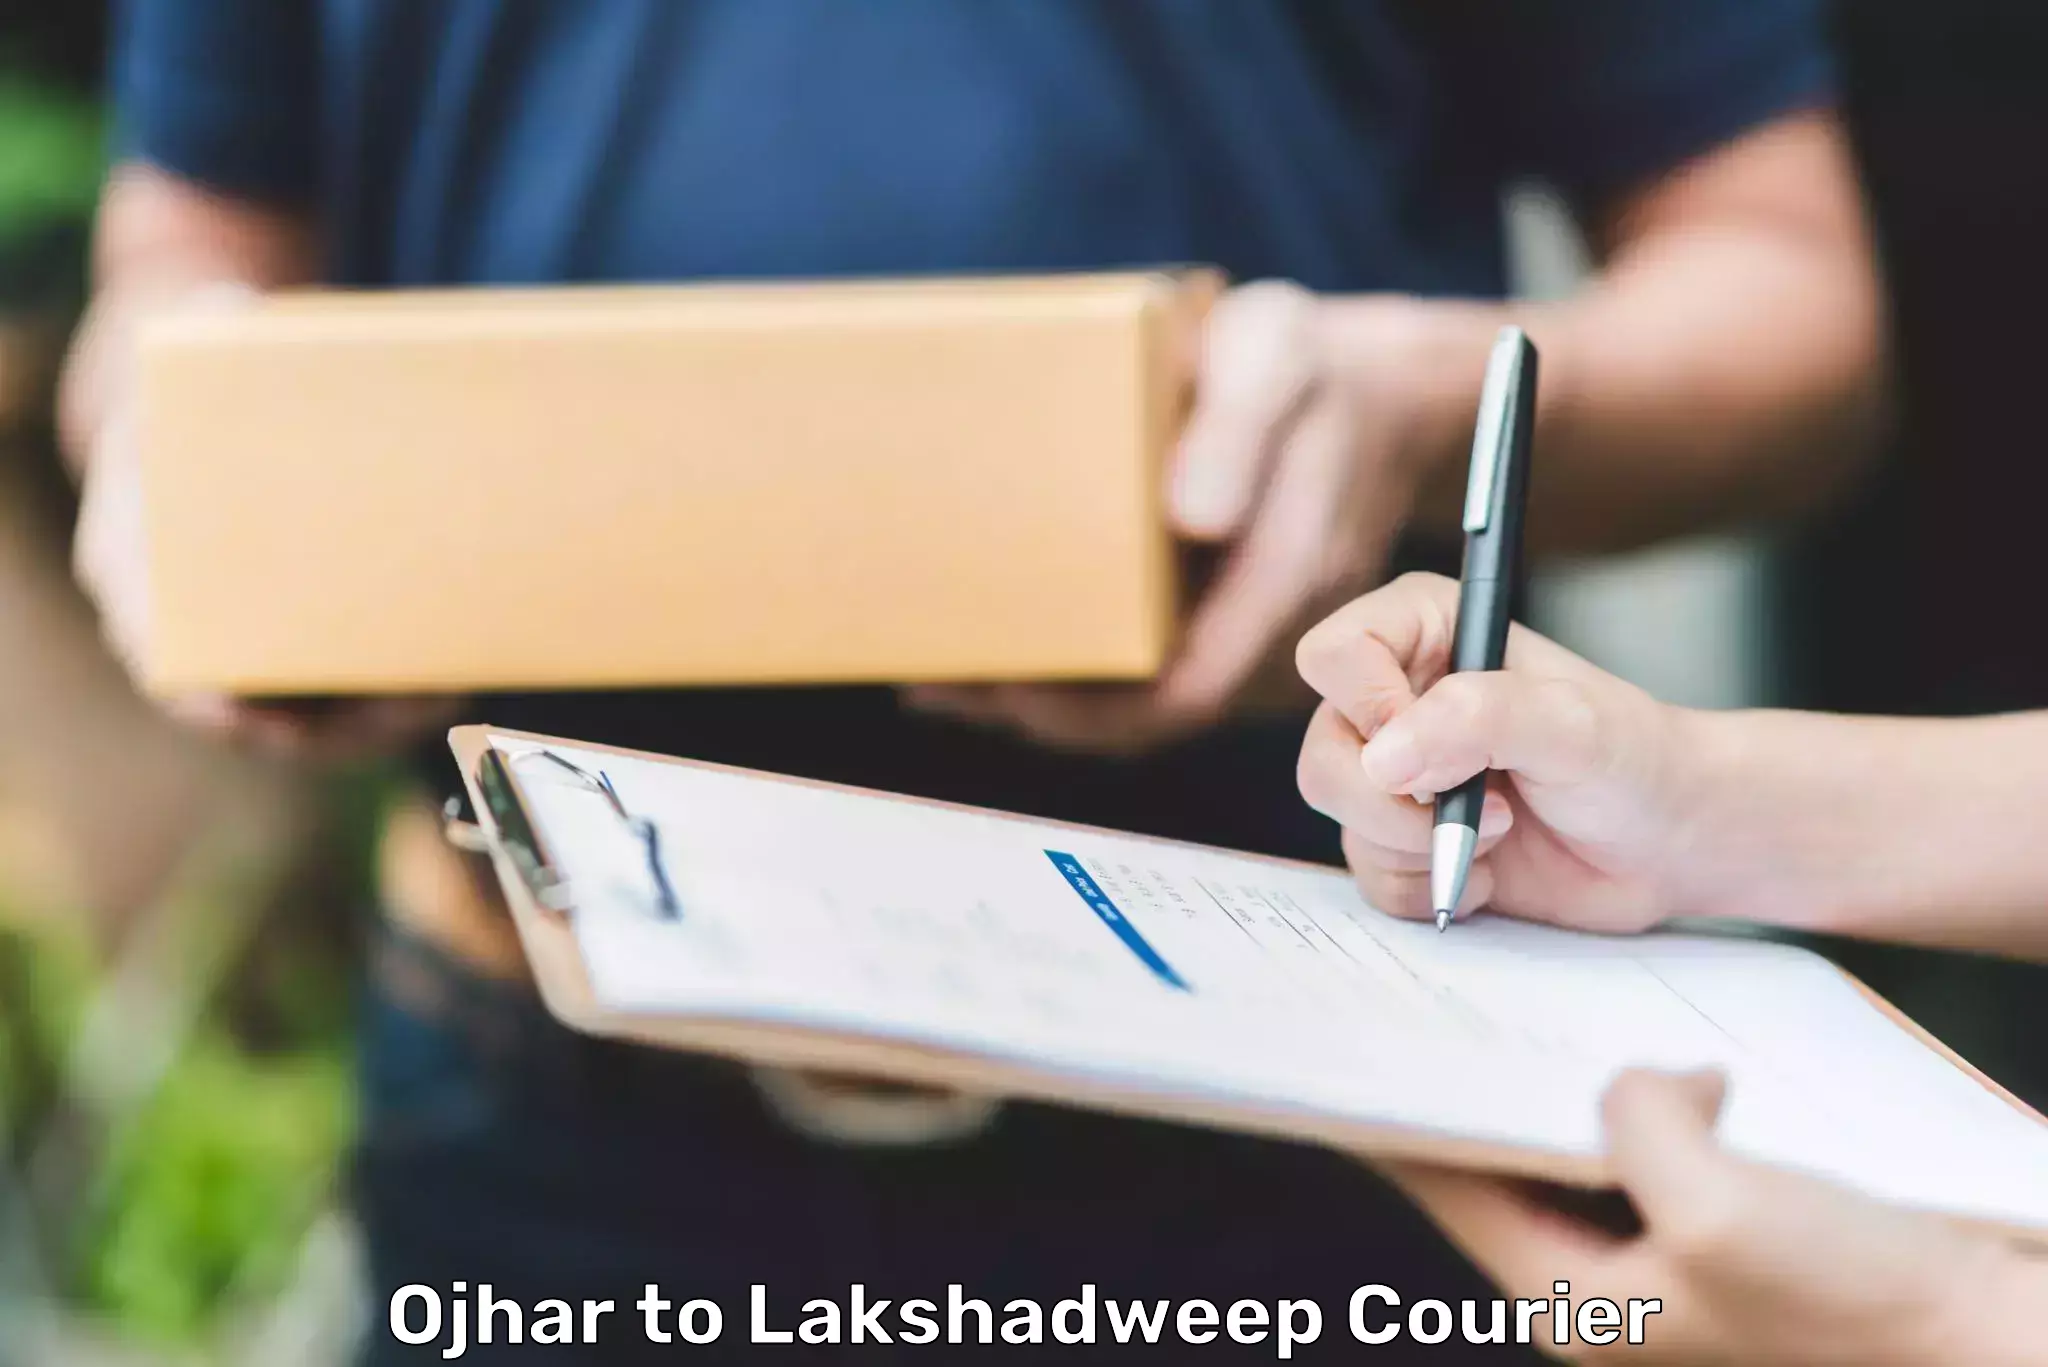 Remote area delivery in Ojhar to Lakshadweep